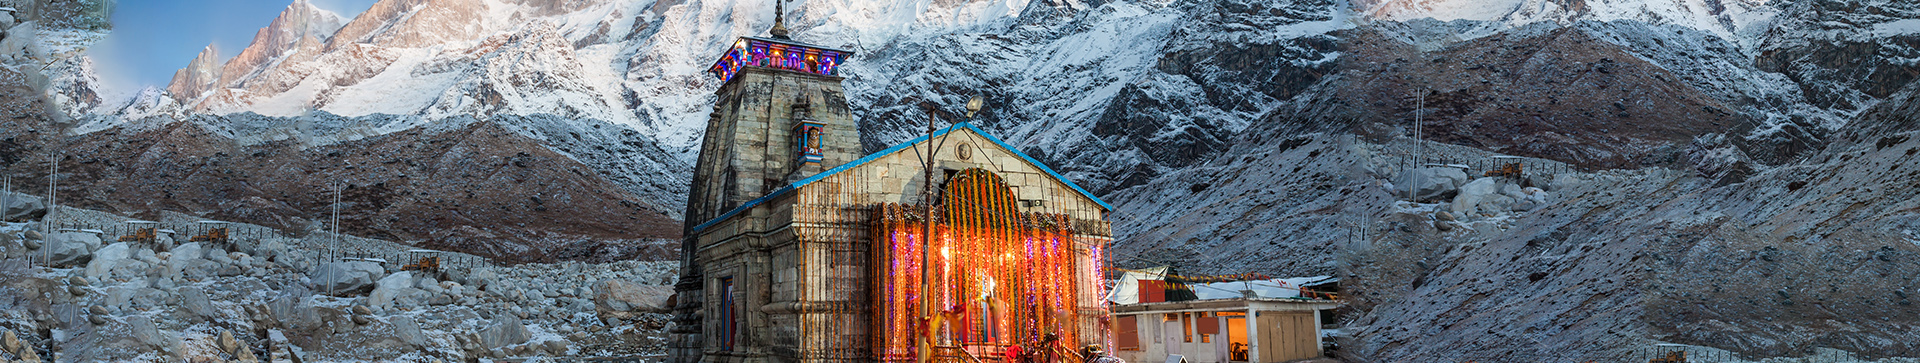 DO DHAM YATRA BY HELICOPTER QUICK TOUR